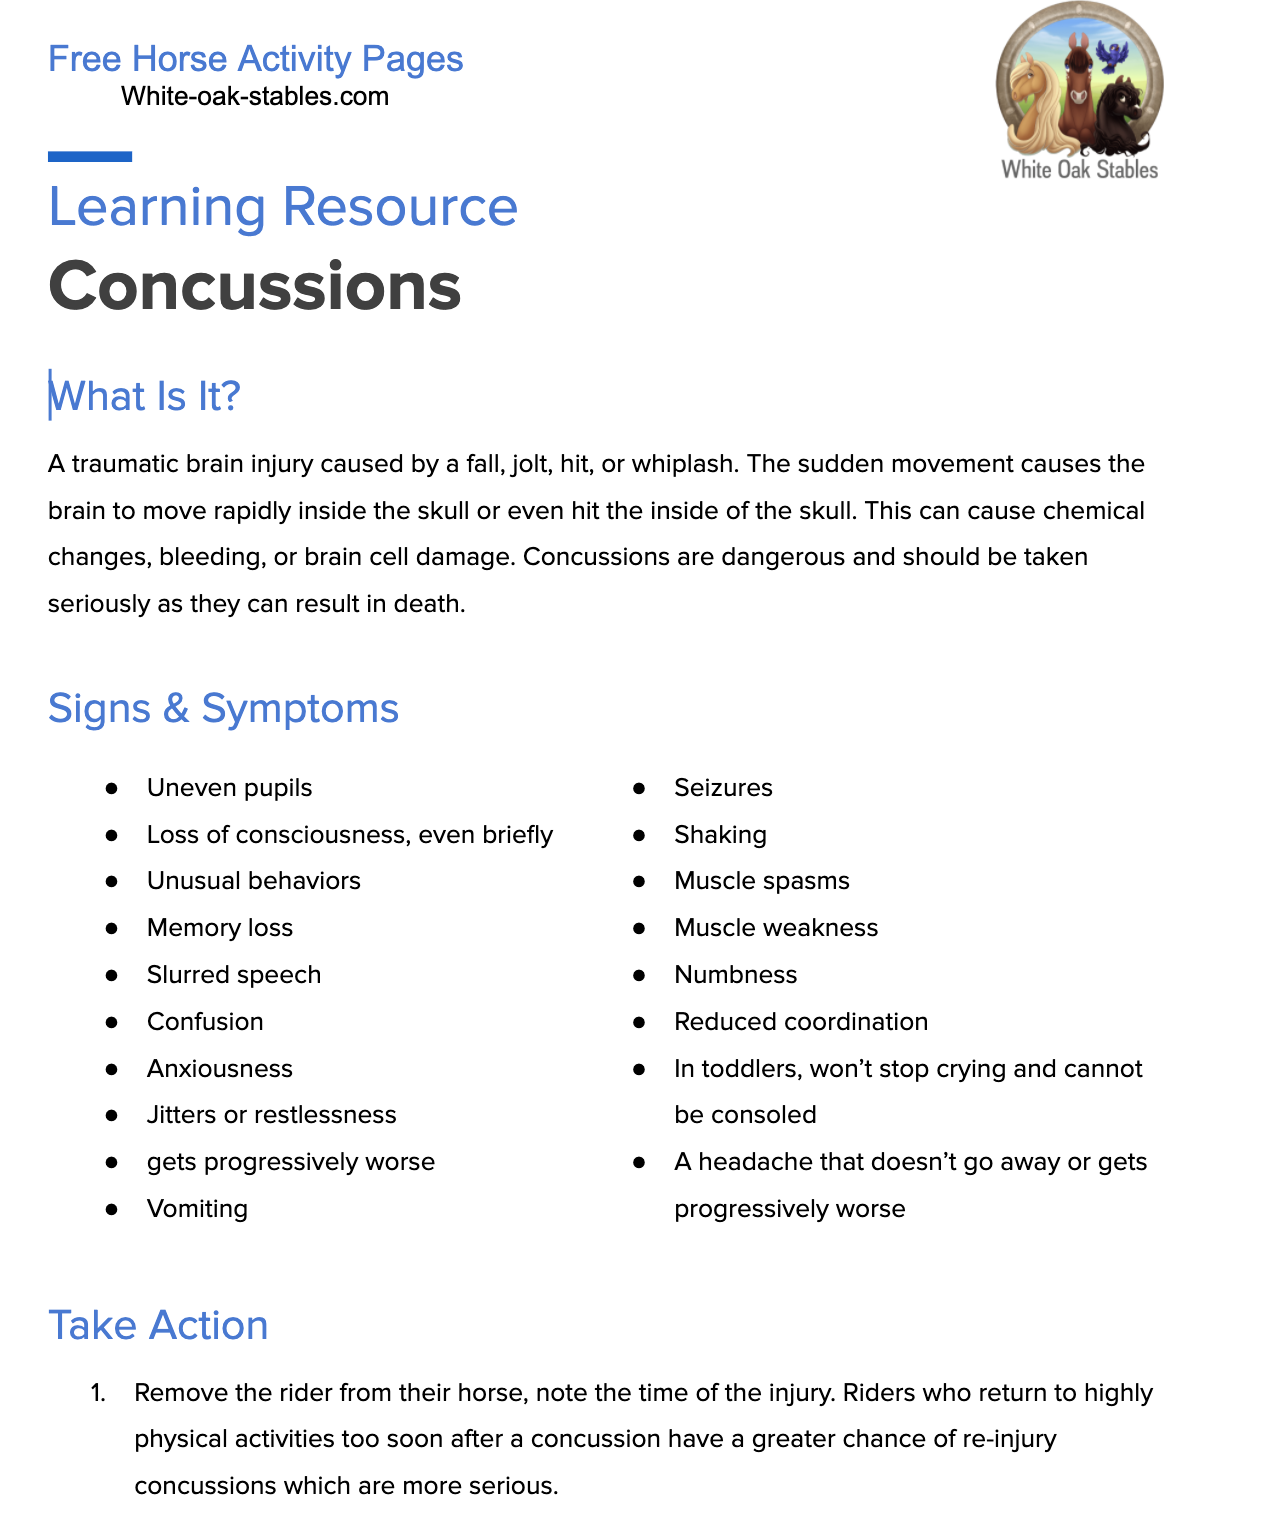 Learning Resource – Concussions